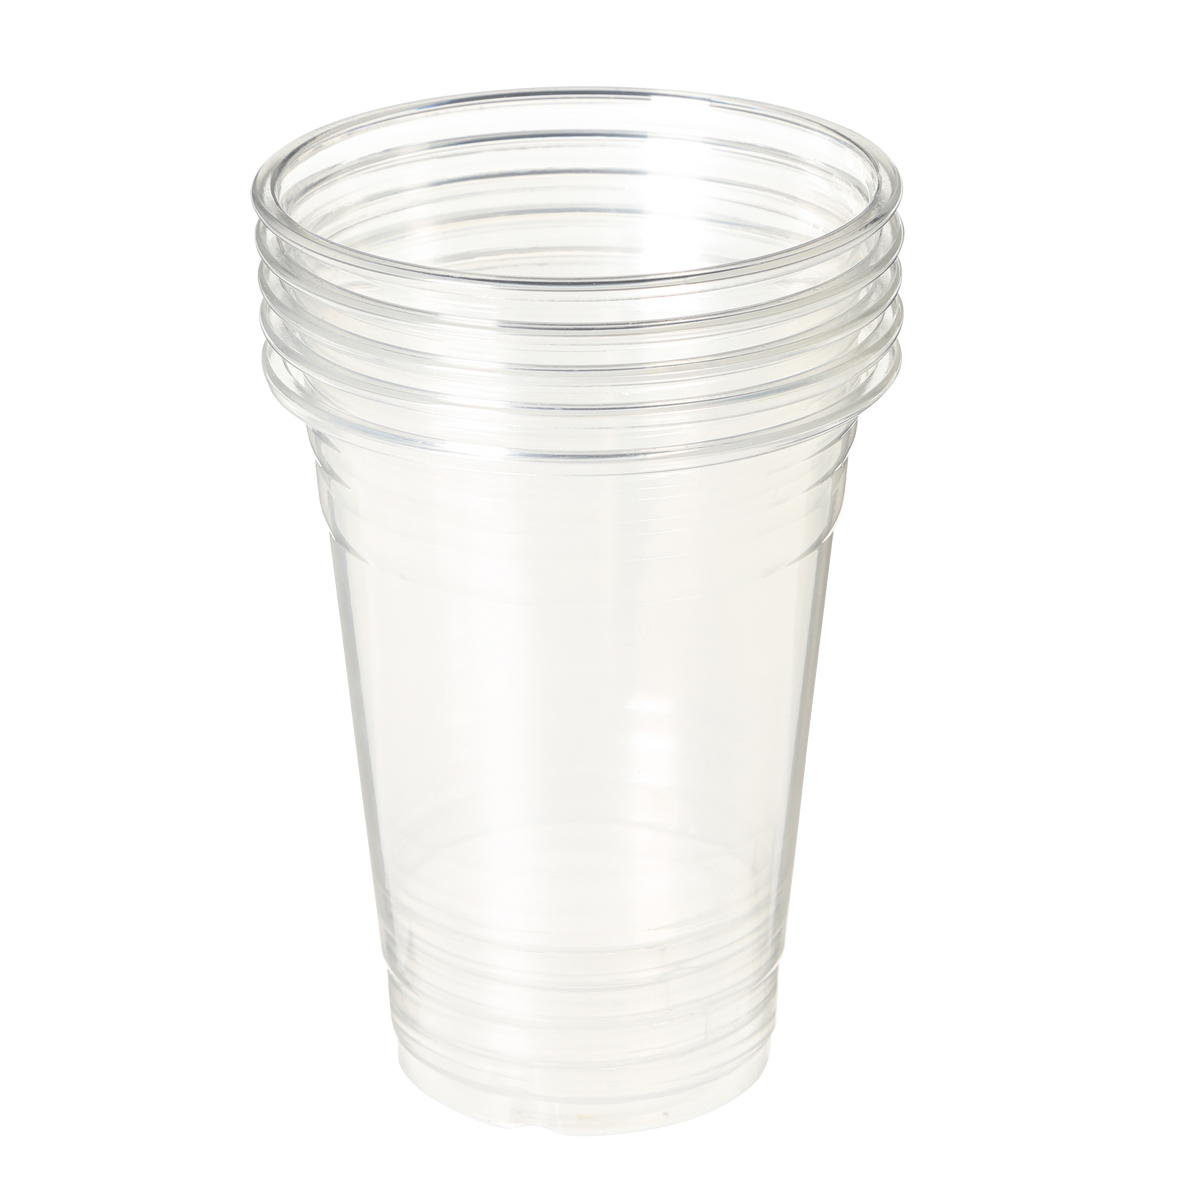 50 x Disposable Plastic Pint + 50 x Half Pint Cup Multipack - Caterline -